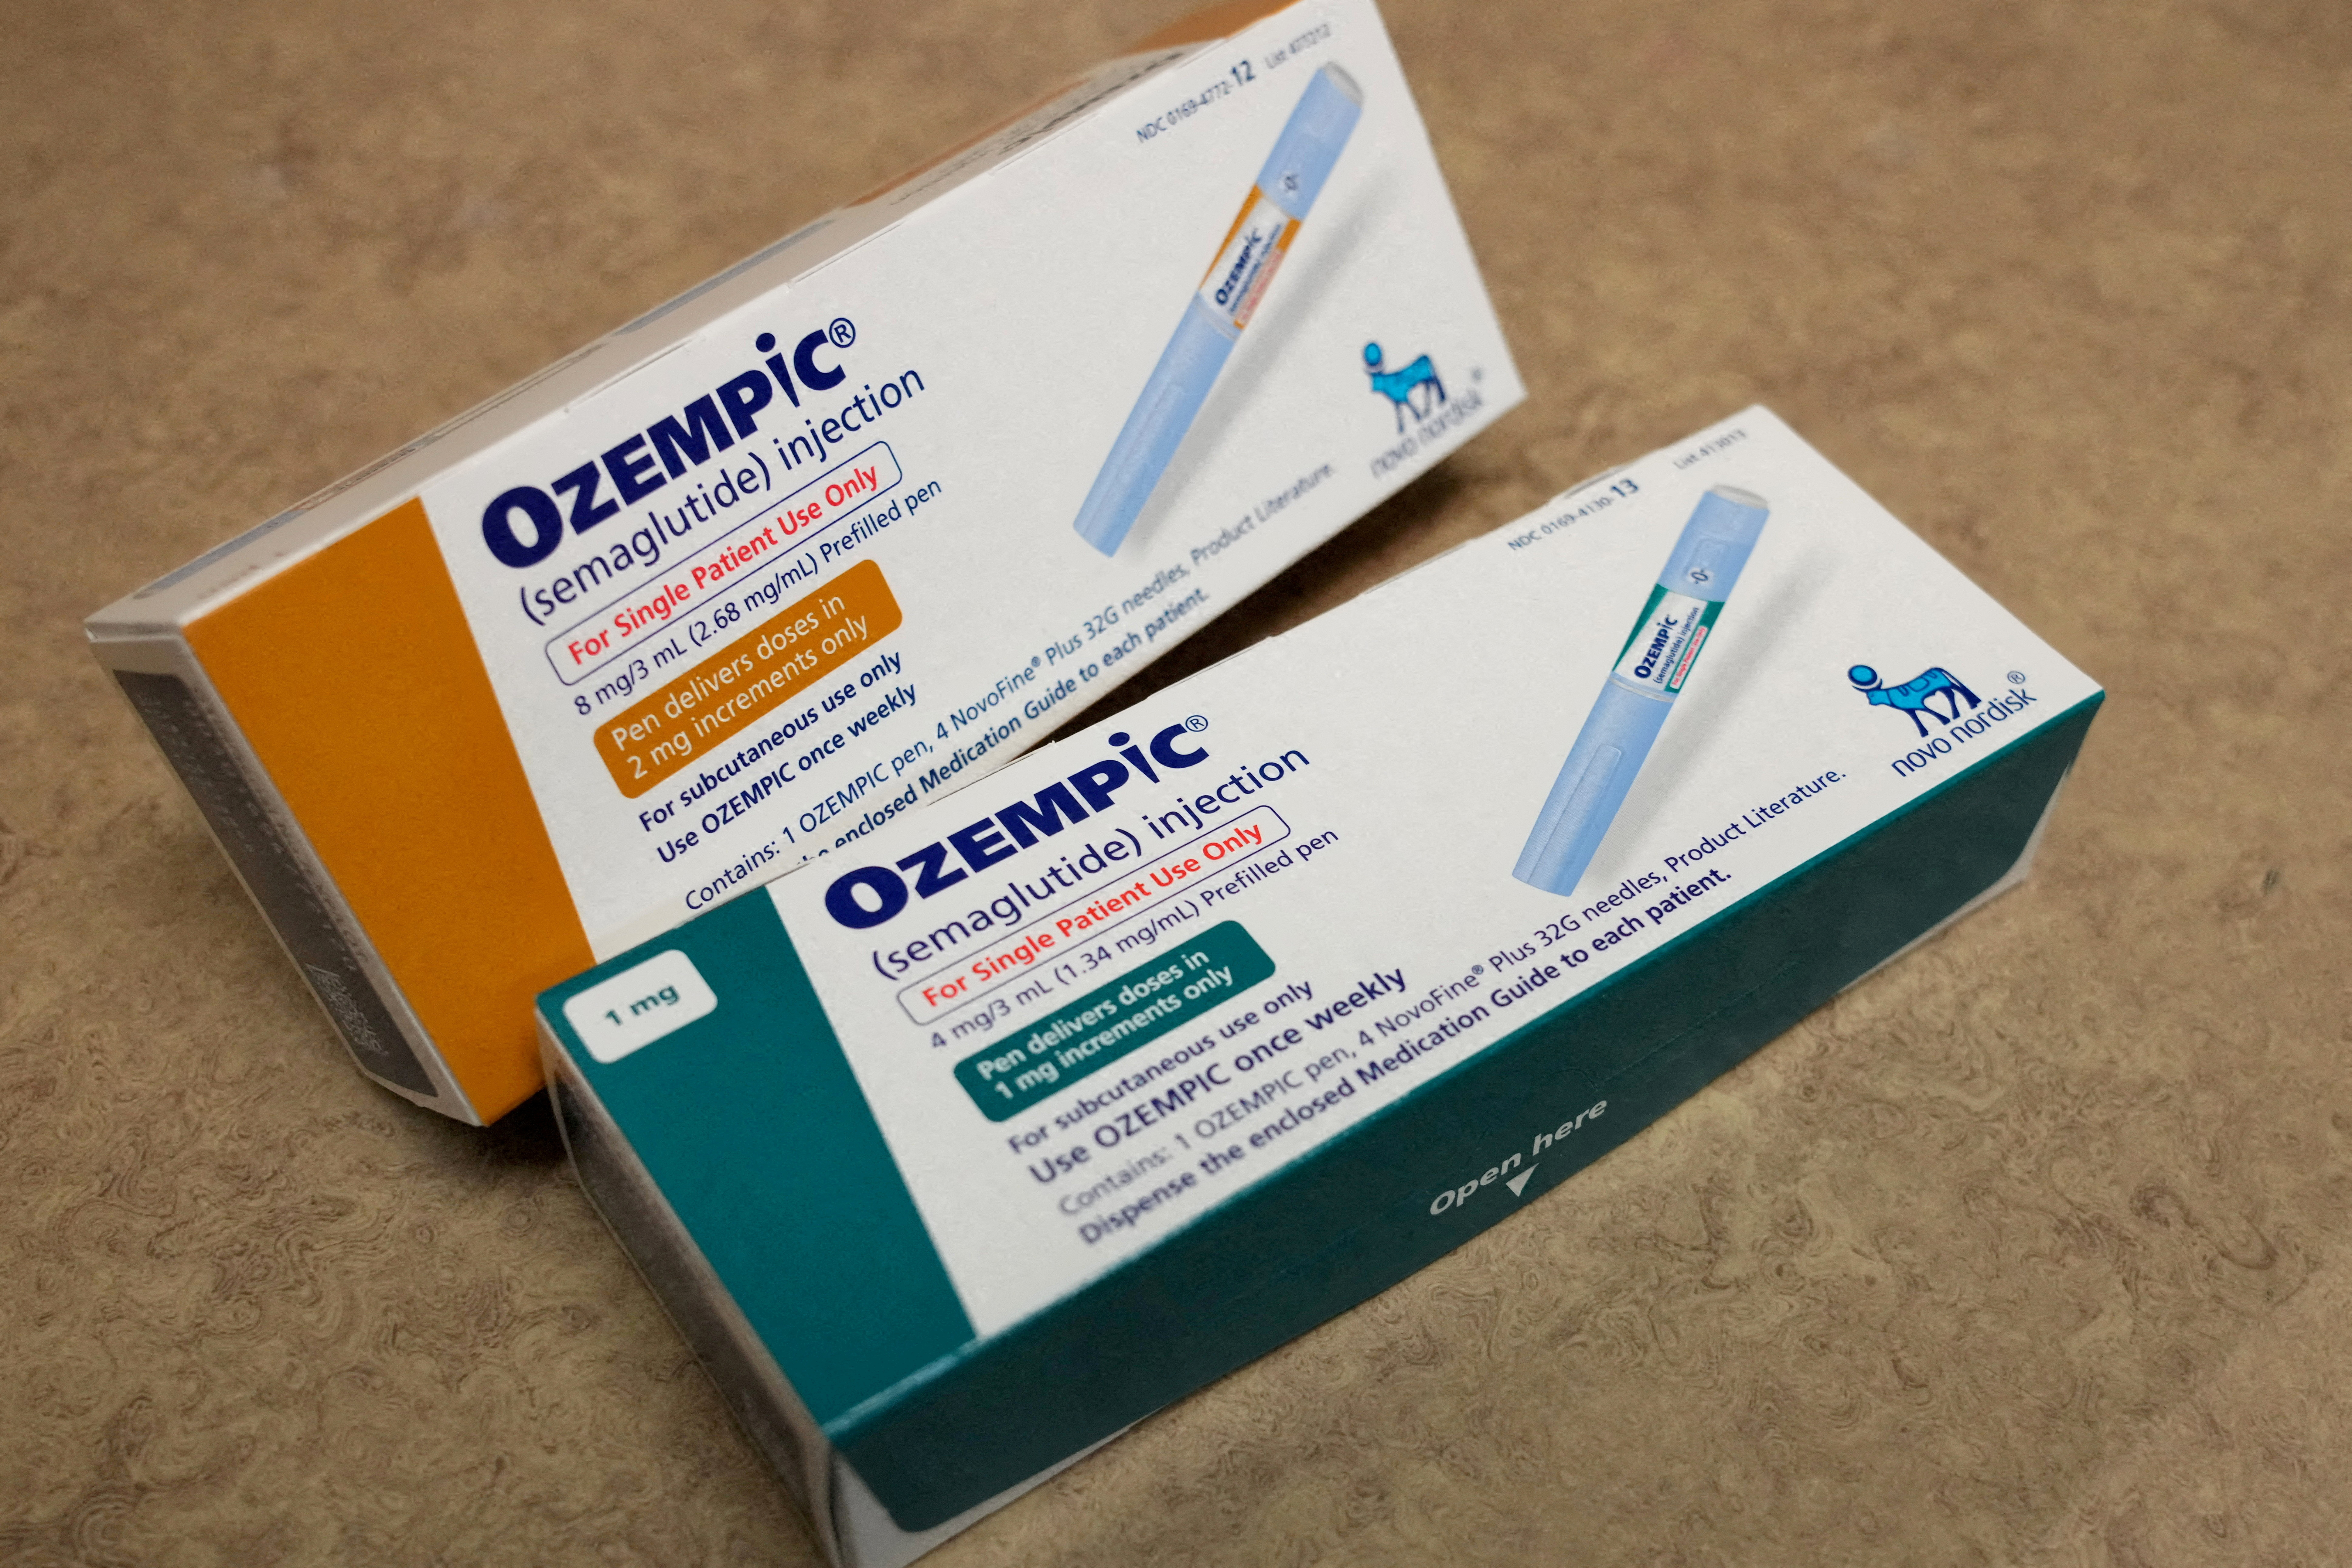 OZEMPIC® is now listed on British Columbia PharmaCare for adults living  with type 2 diabetes